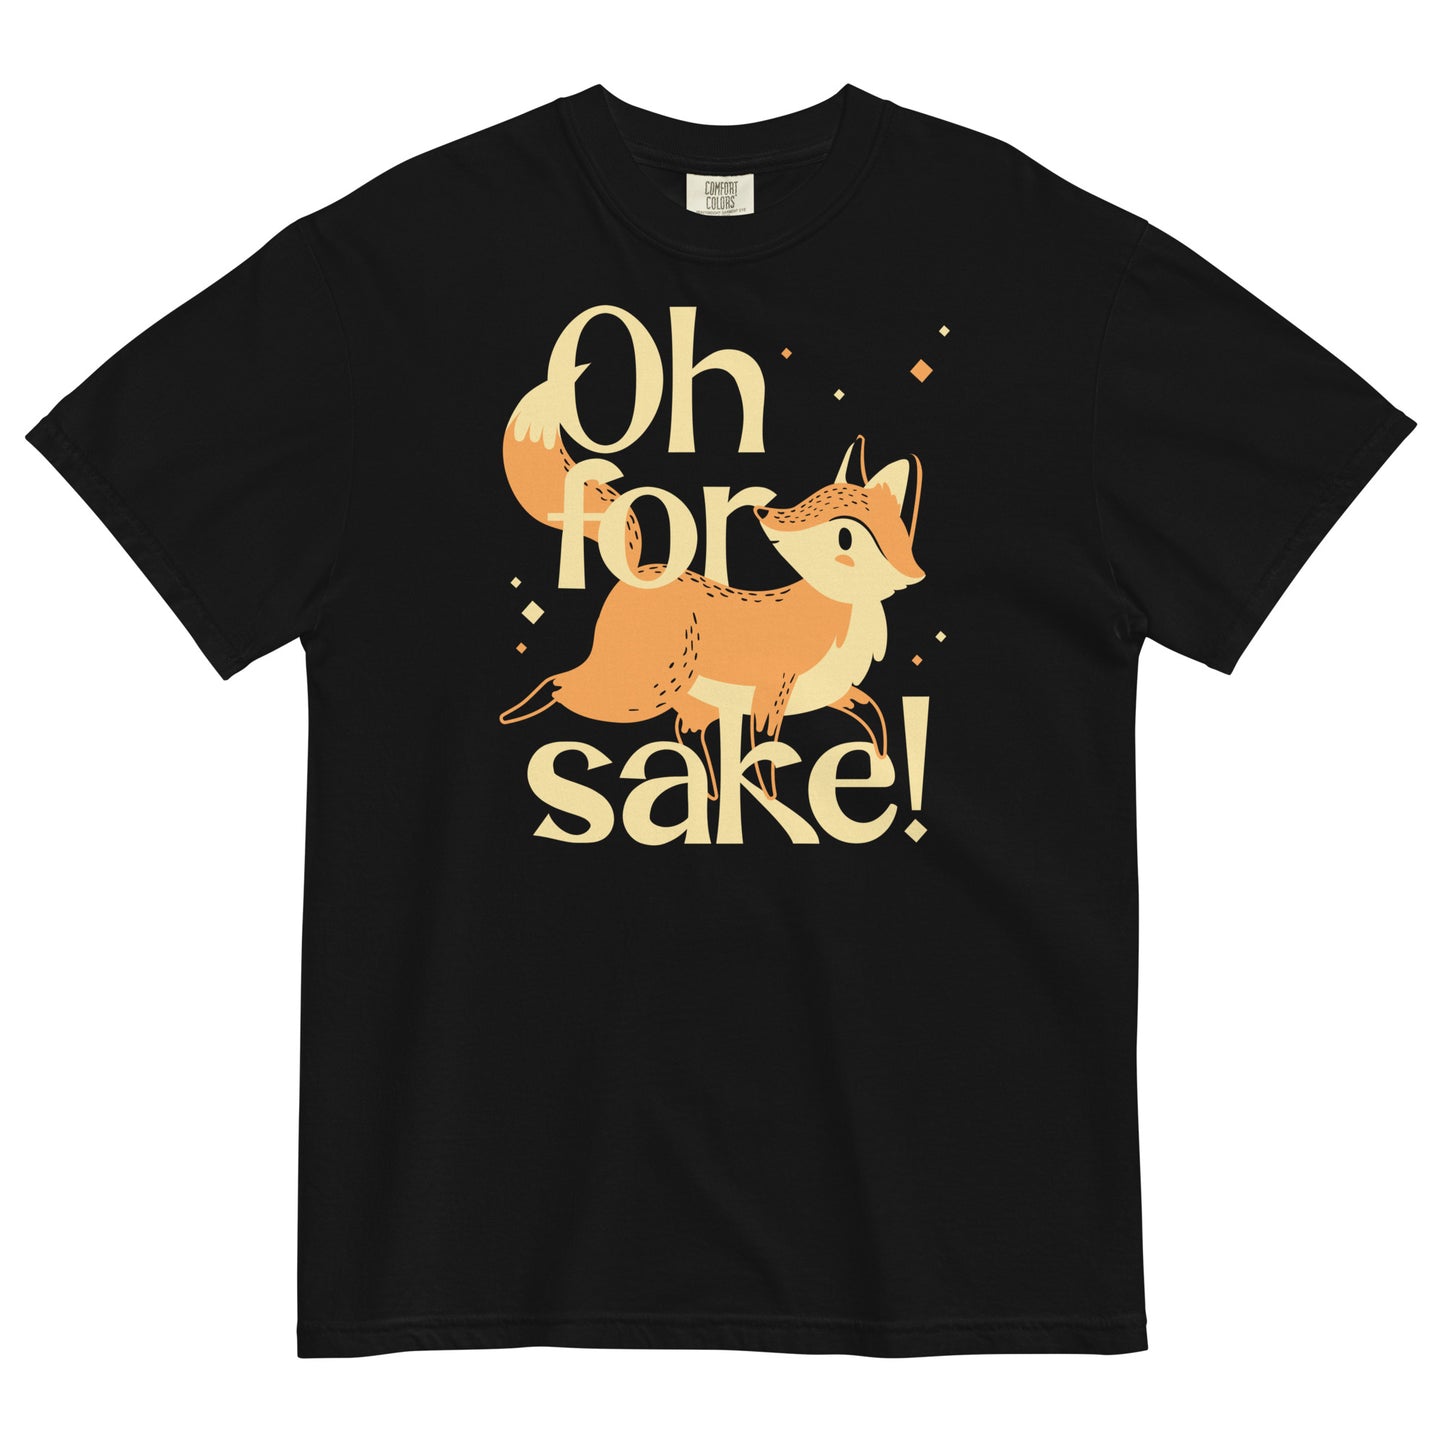 Oh For Fox Sake! Men's Relaxed Fit Tee